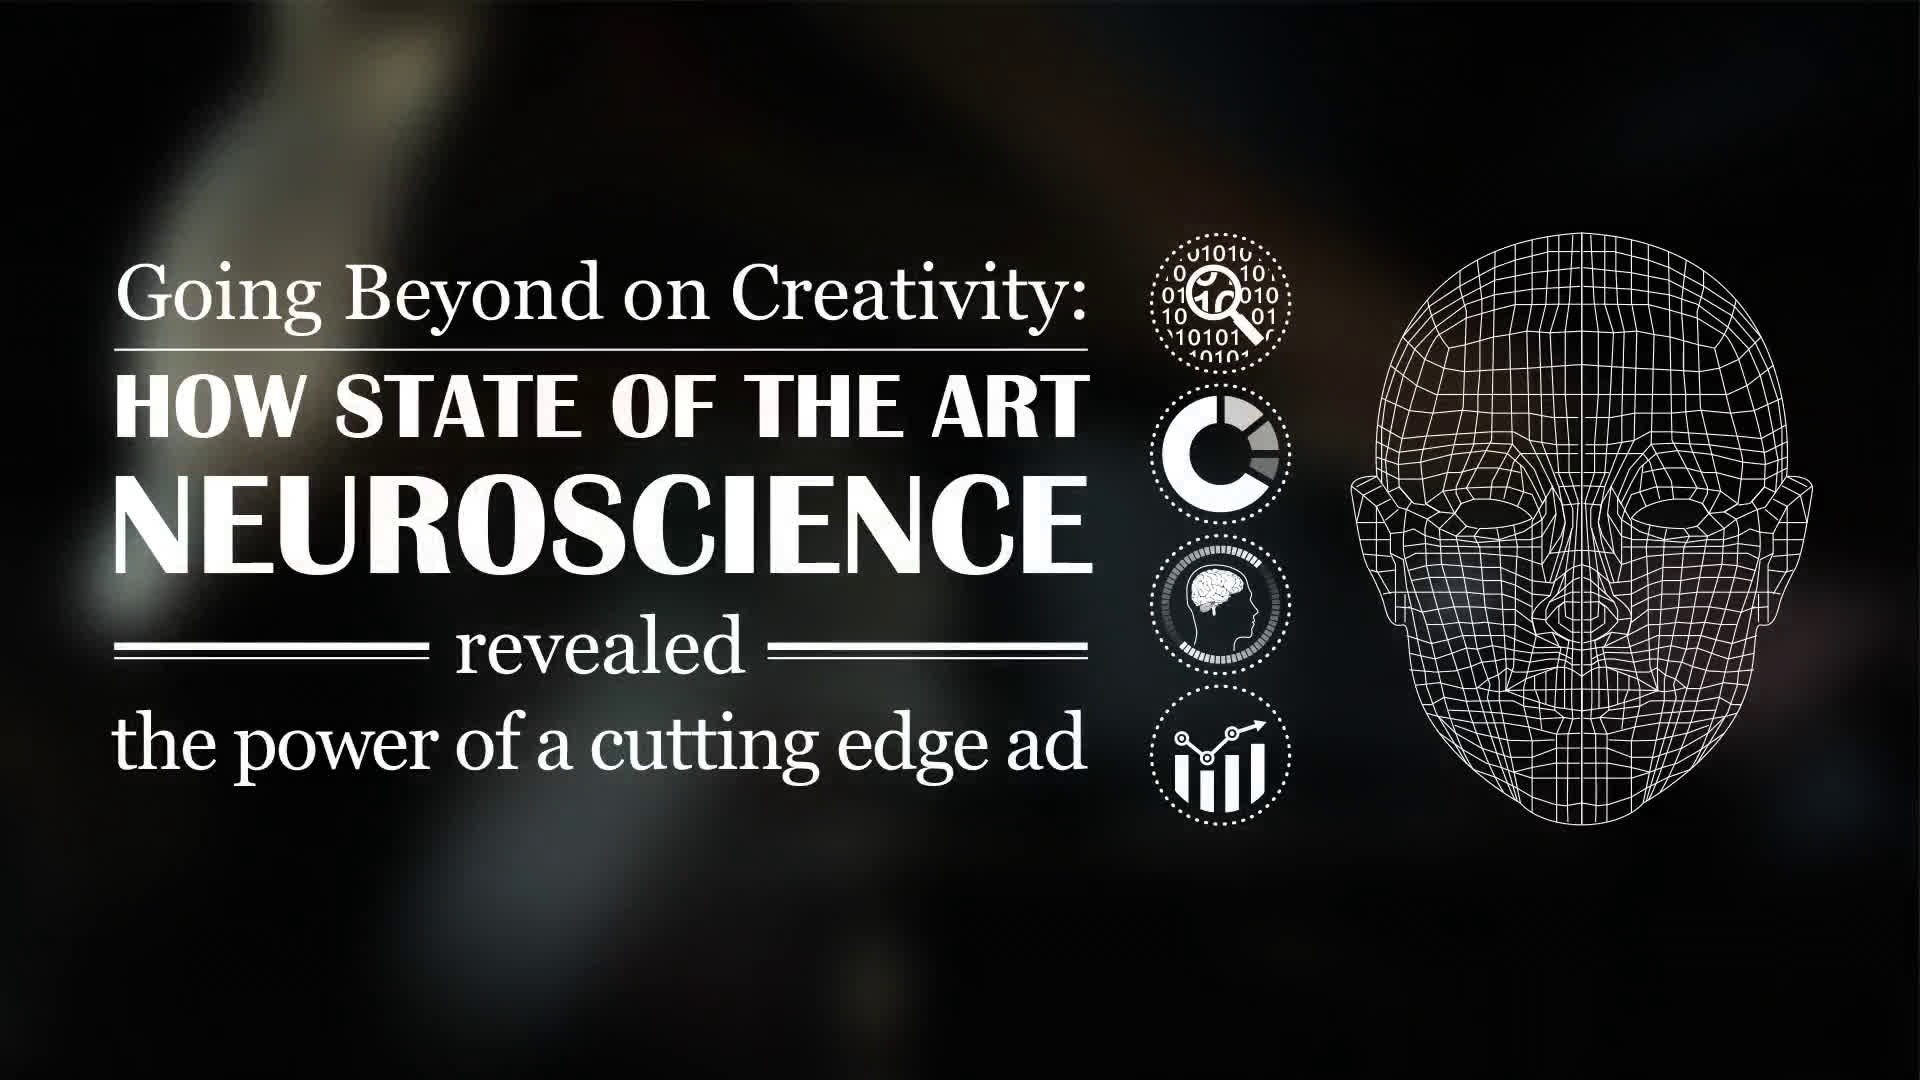 HOW STATE OF THE ART NEUROSCIENCE REVEALED THE POWER OF A CUTTING EDGE AD